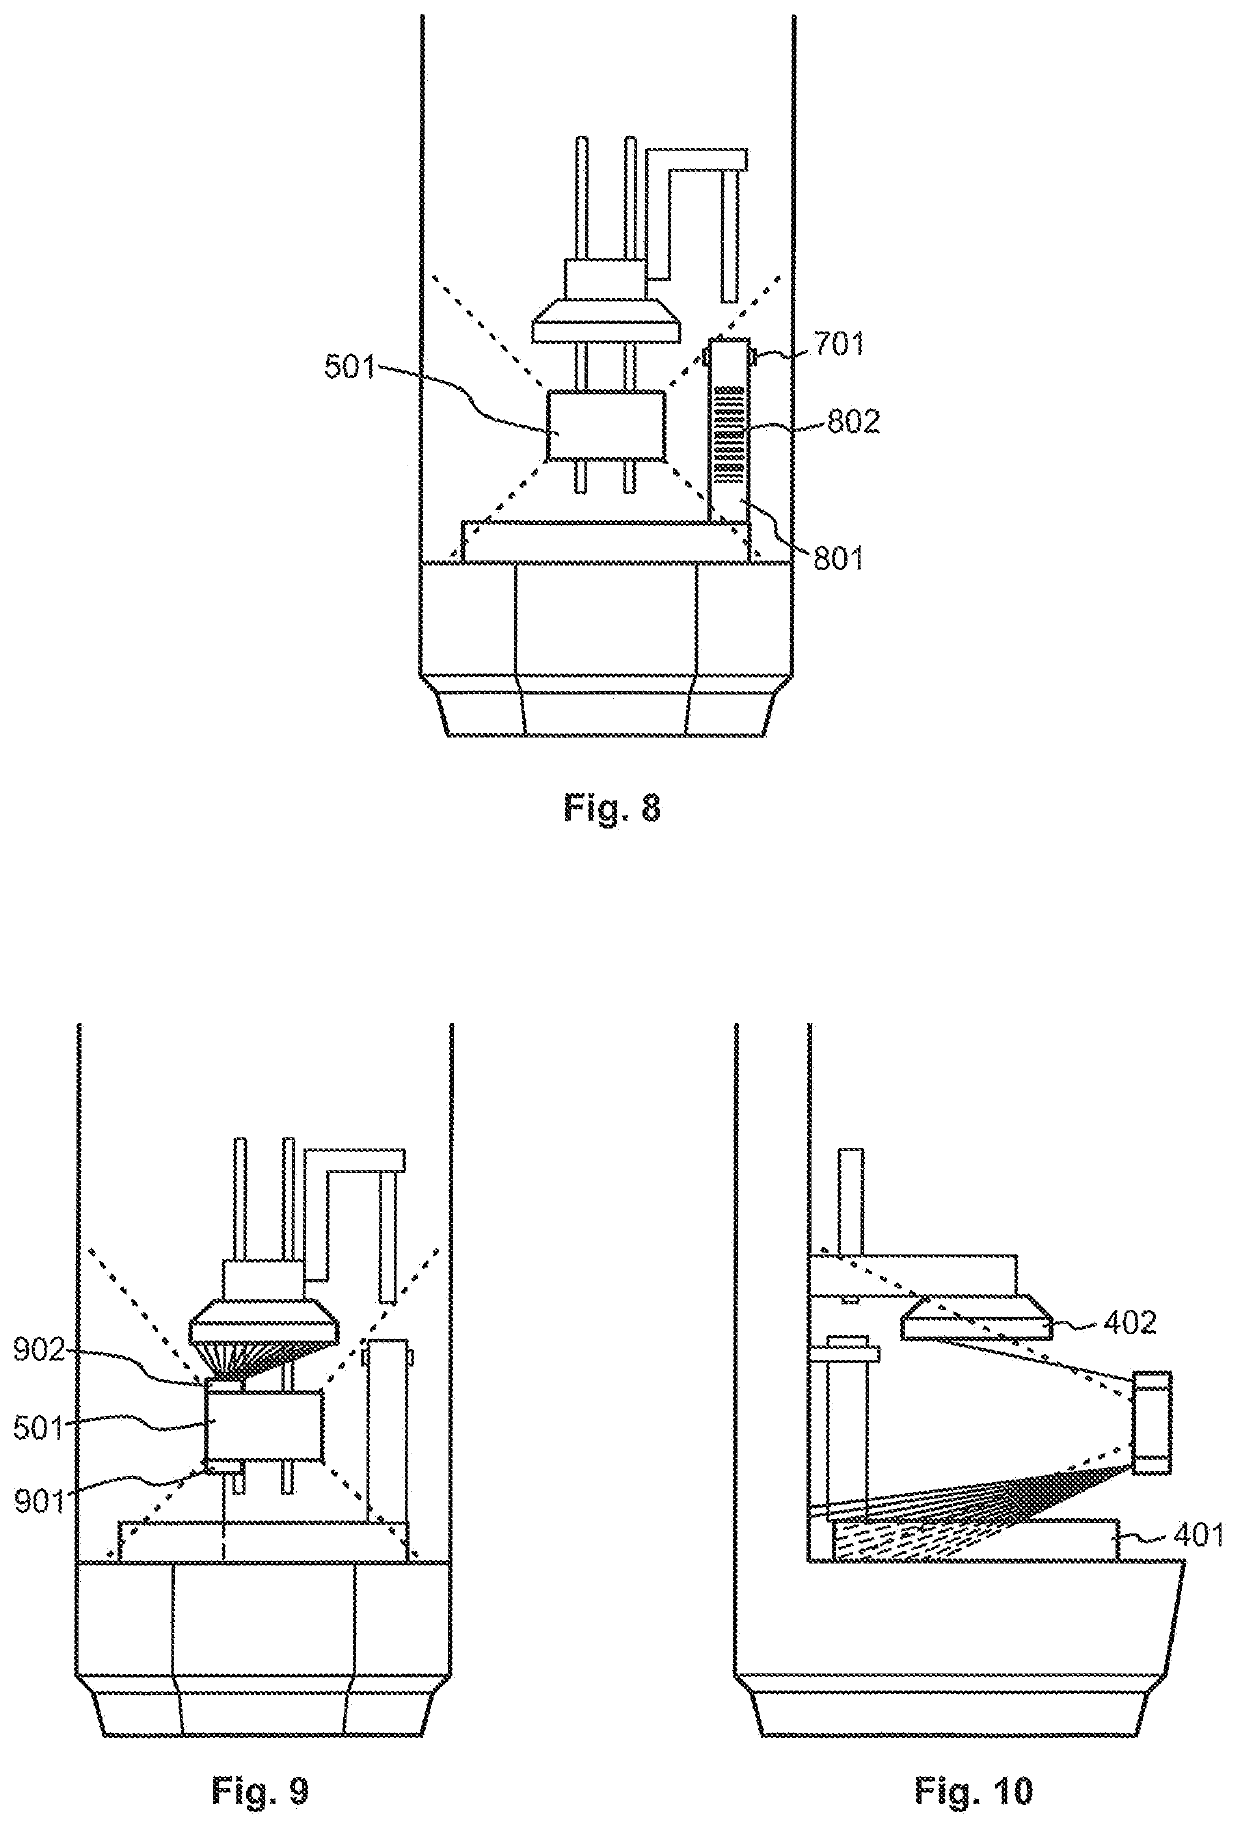 Stereolithography apparatus equipped for detecting amount of resin, and method of operating same